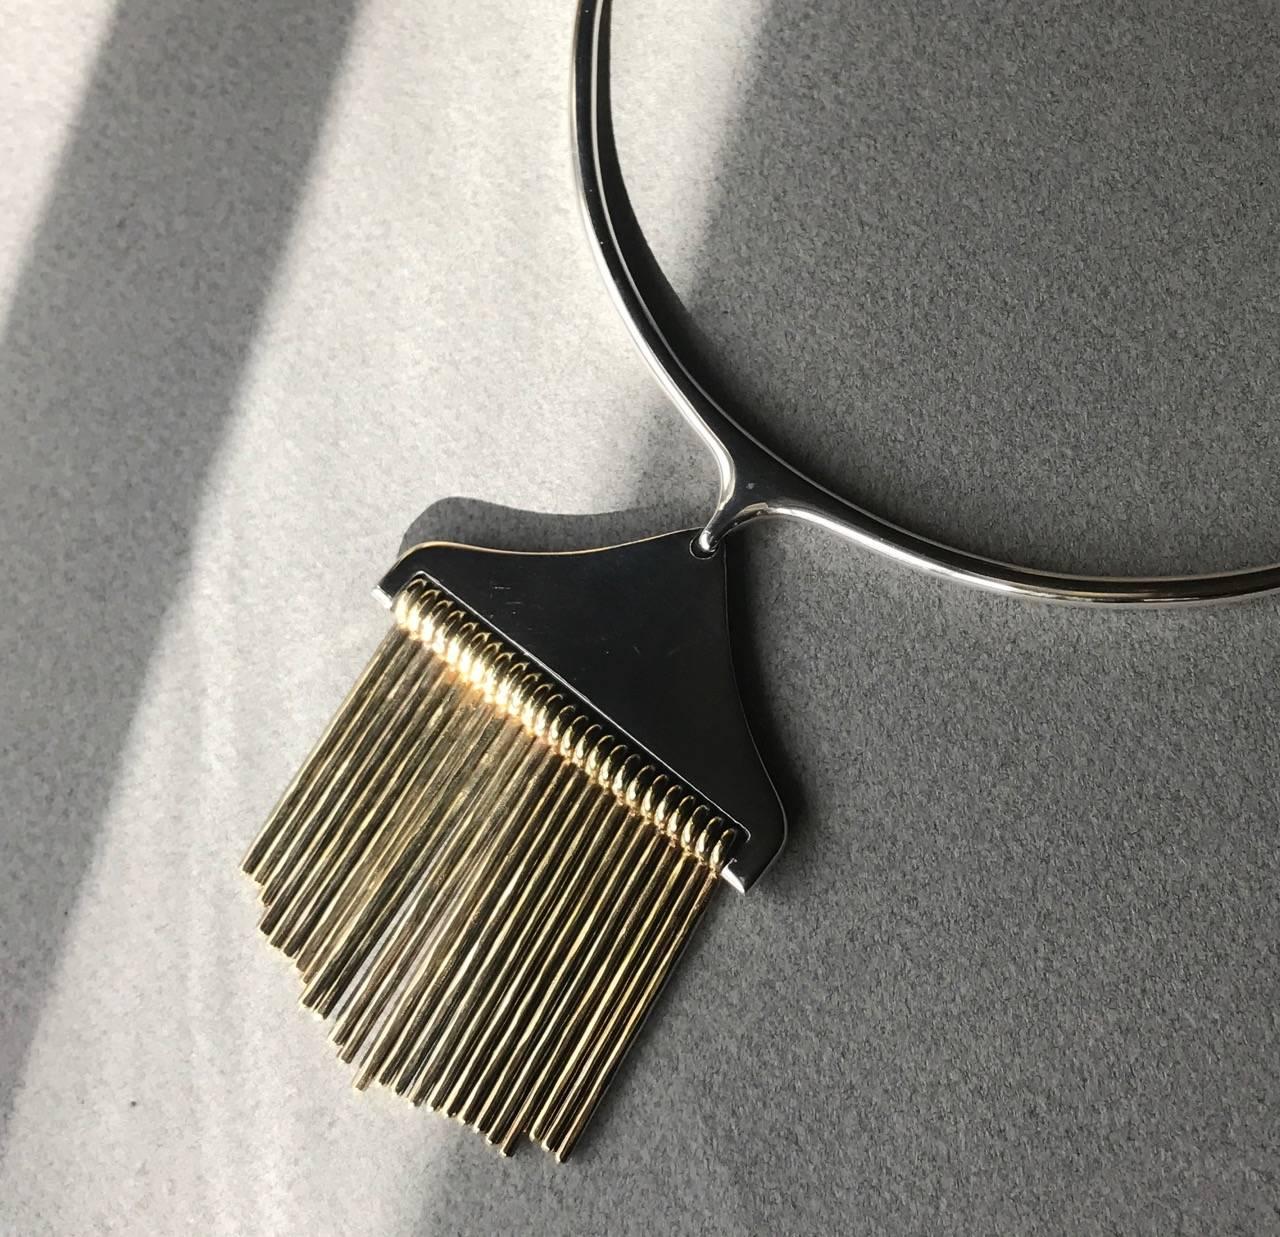 Hans Hansen Sterling Silver Necklace With Pendant By Bent Gabrielsen.

Pendant has Gold Gilt hand Hammer bars and Necklace has smooth sterling hinged bars and toggle clasp for comfortable wear.
This rare design can be seen in the permanent